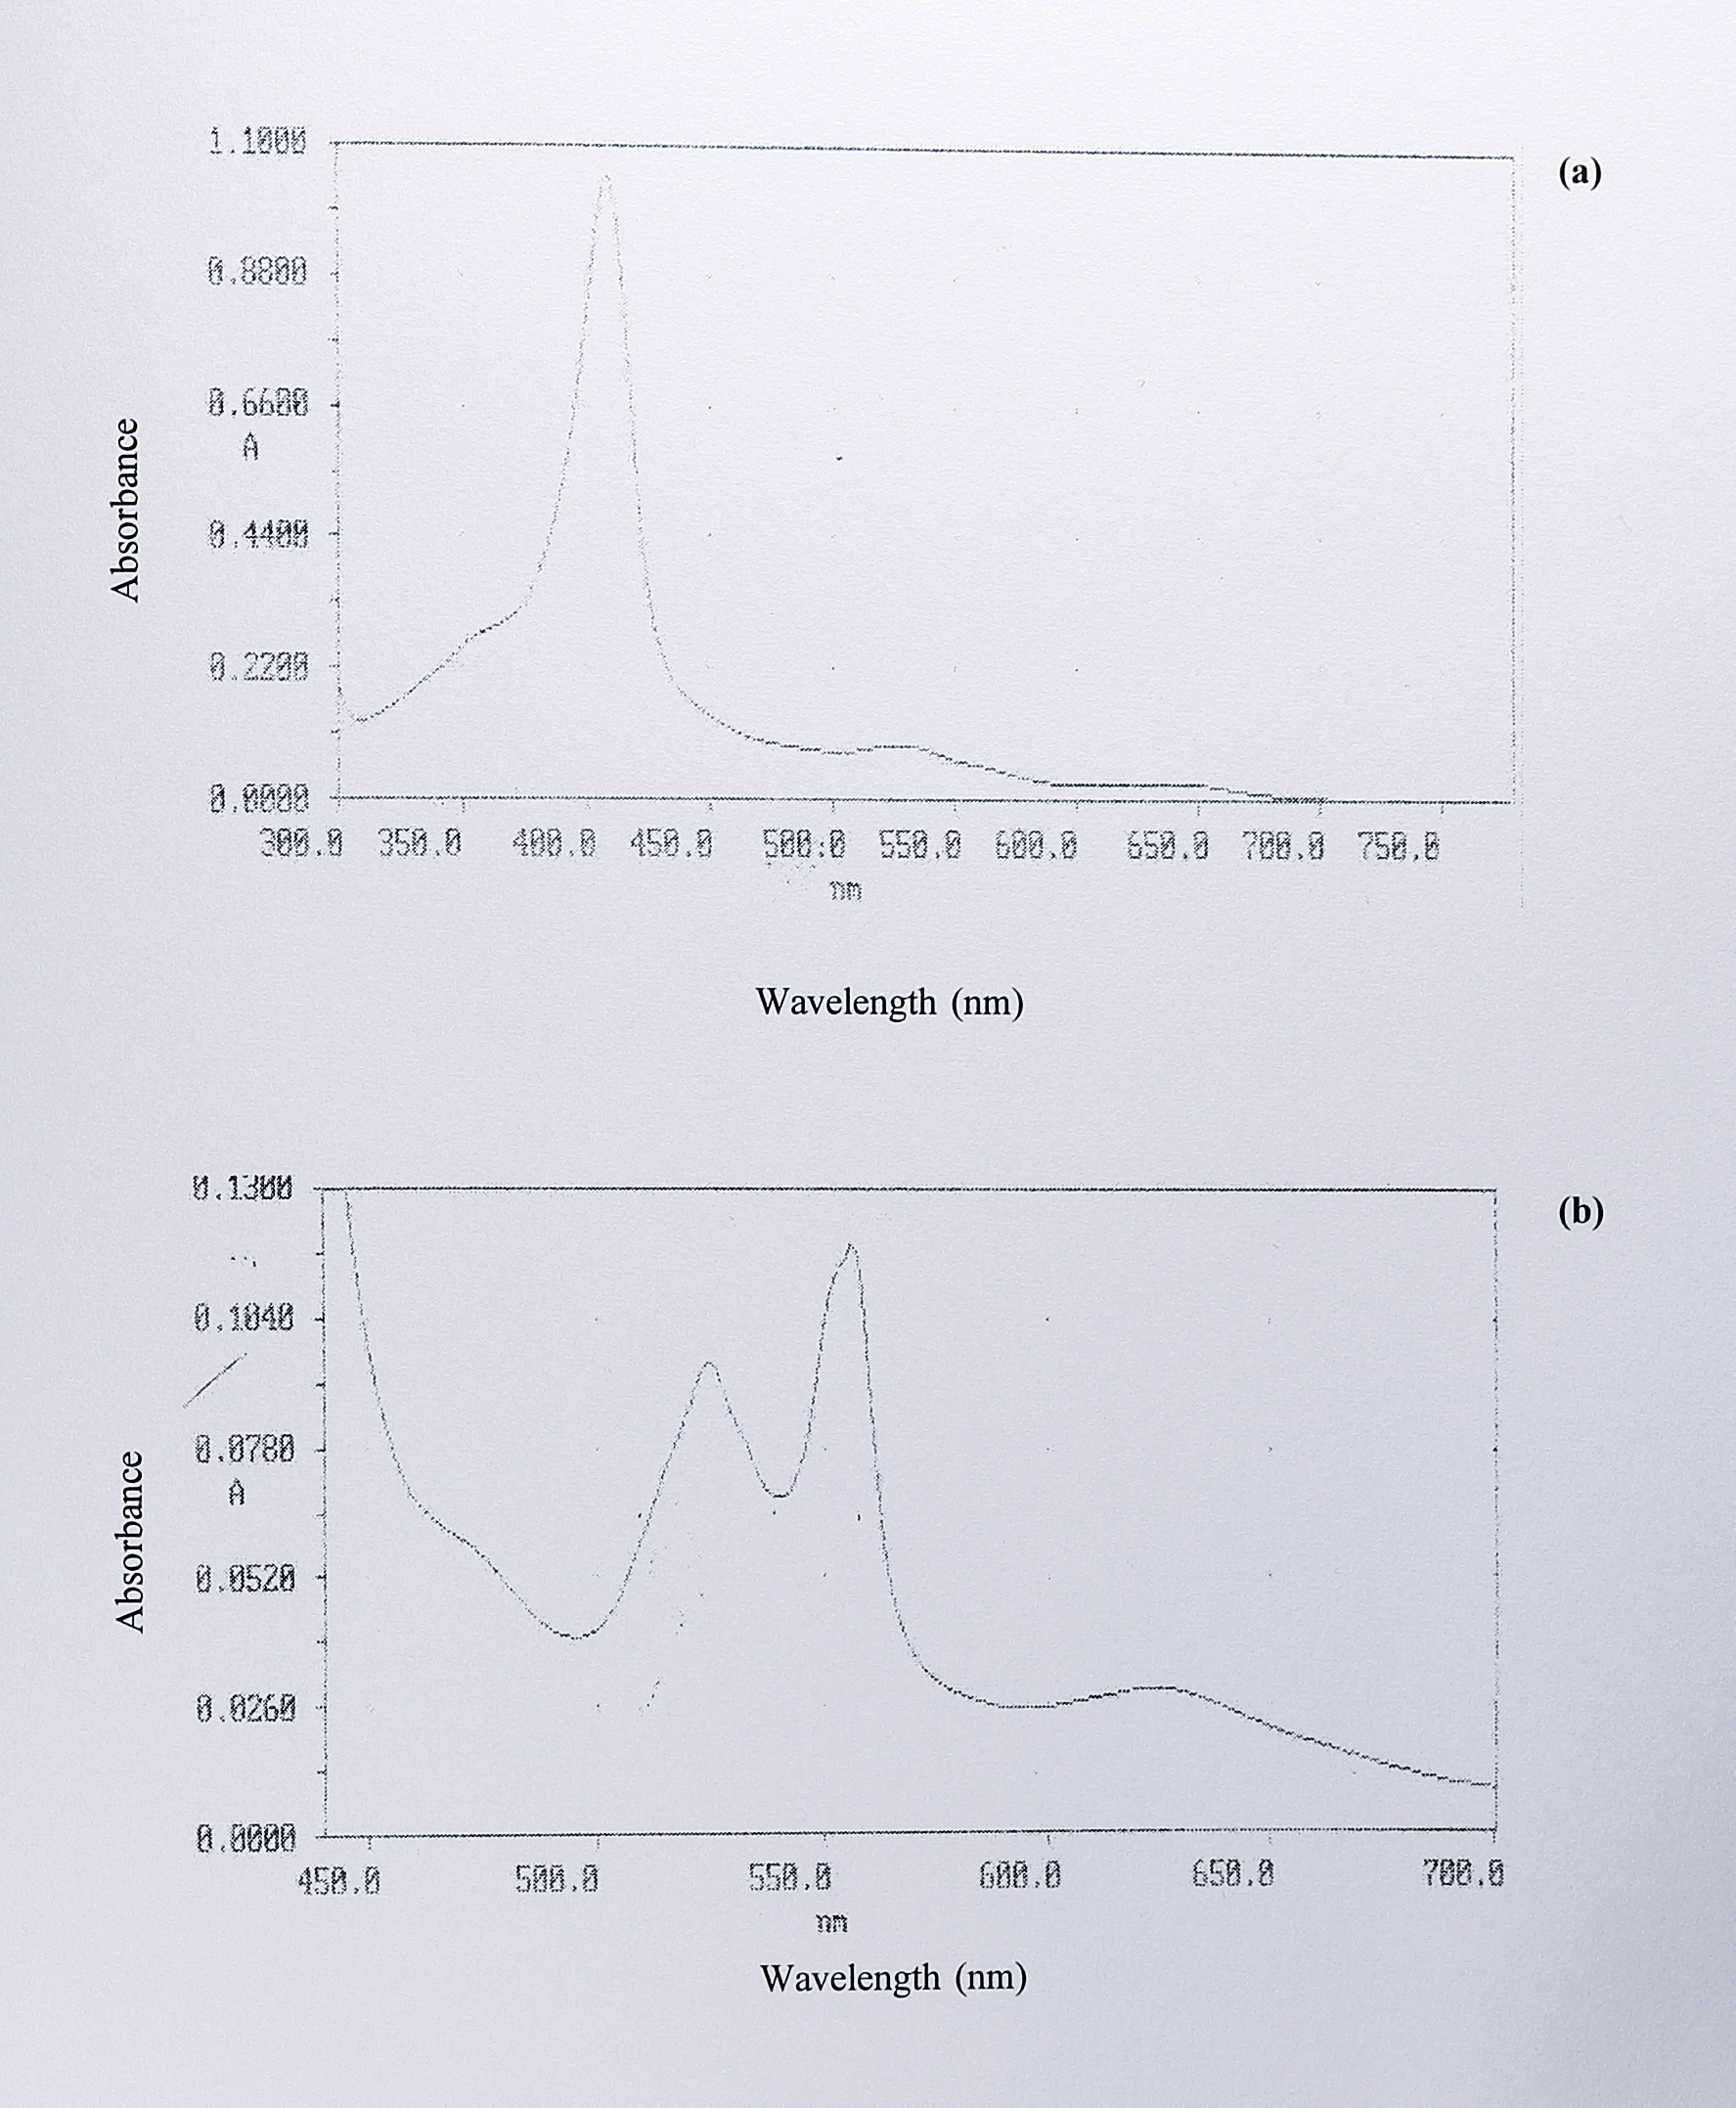 Visible spectra of cytochrome _c_ peroxidase from _T. pantotropha_ [pMMBY25F]. Peak 4 as isolated showed absorbance maxima at 408, 526 and 639 nm. When reduced with sodium dithionite, absorbance maxima were seen at 419, 524, 556 and 620 with a shoulder at the blue side of the 556 nm peak. Peak 4 was identified by spectroscopy, size on SDS-PAGE and enzyme assay as cytochrome _c_ peroxidase.